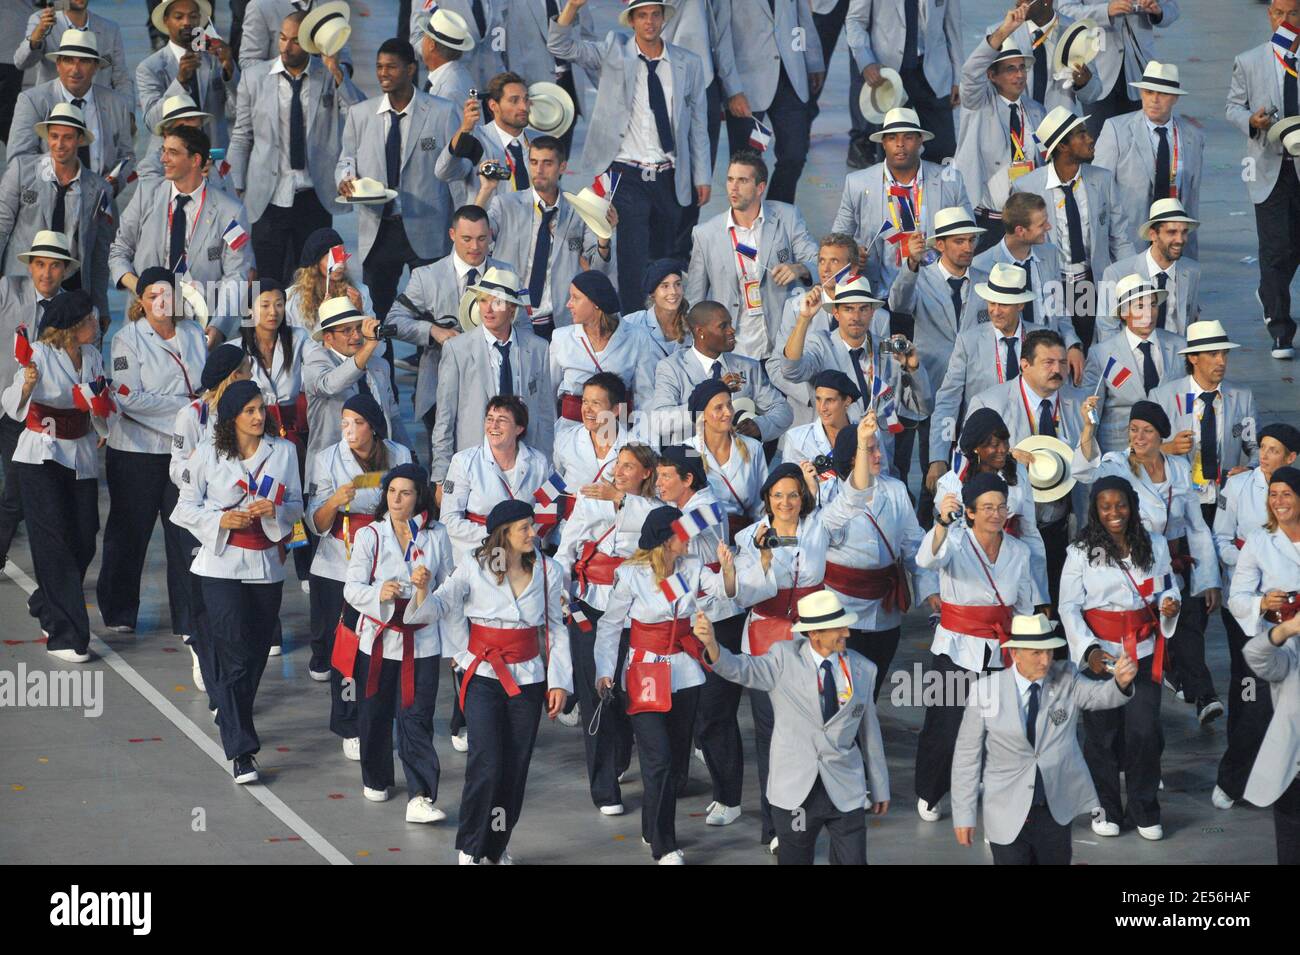 The France delegation during the Opening Ceremony for the 2008 Beijing Summer Olympics at the National Stadium in Beijing, China on August 8, 2008. Photo by Gouhier-Hahn-Nebinger/ABACAPRESS.COM Stock Photo